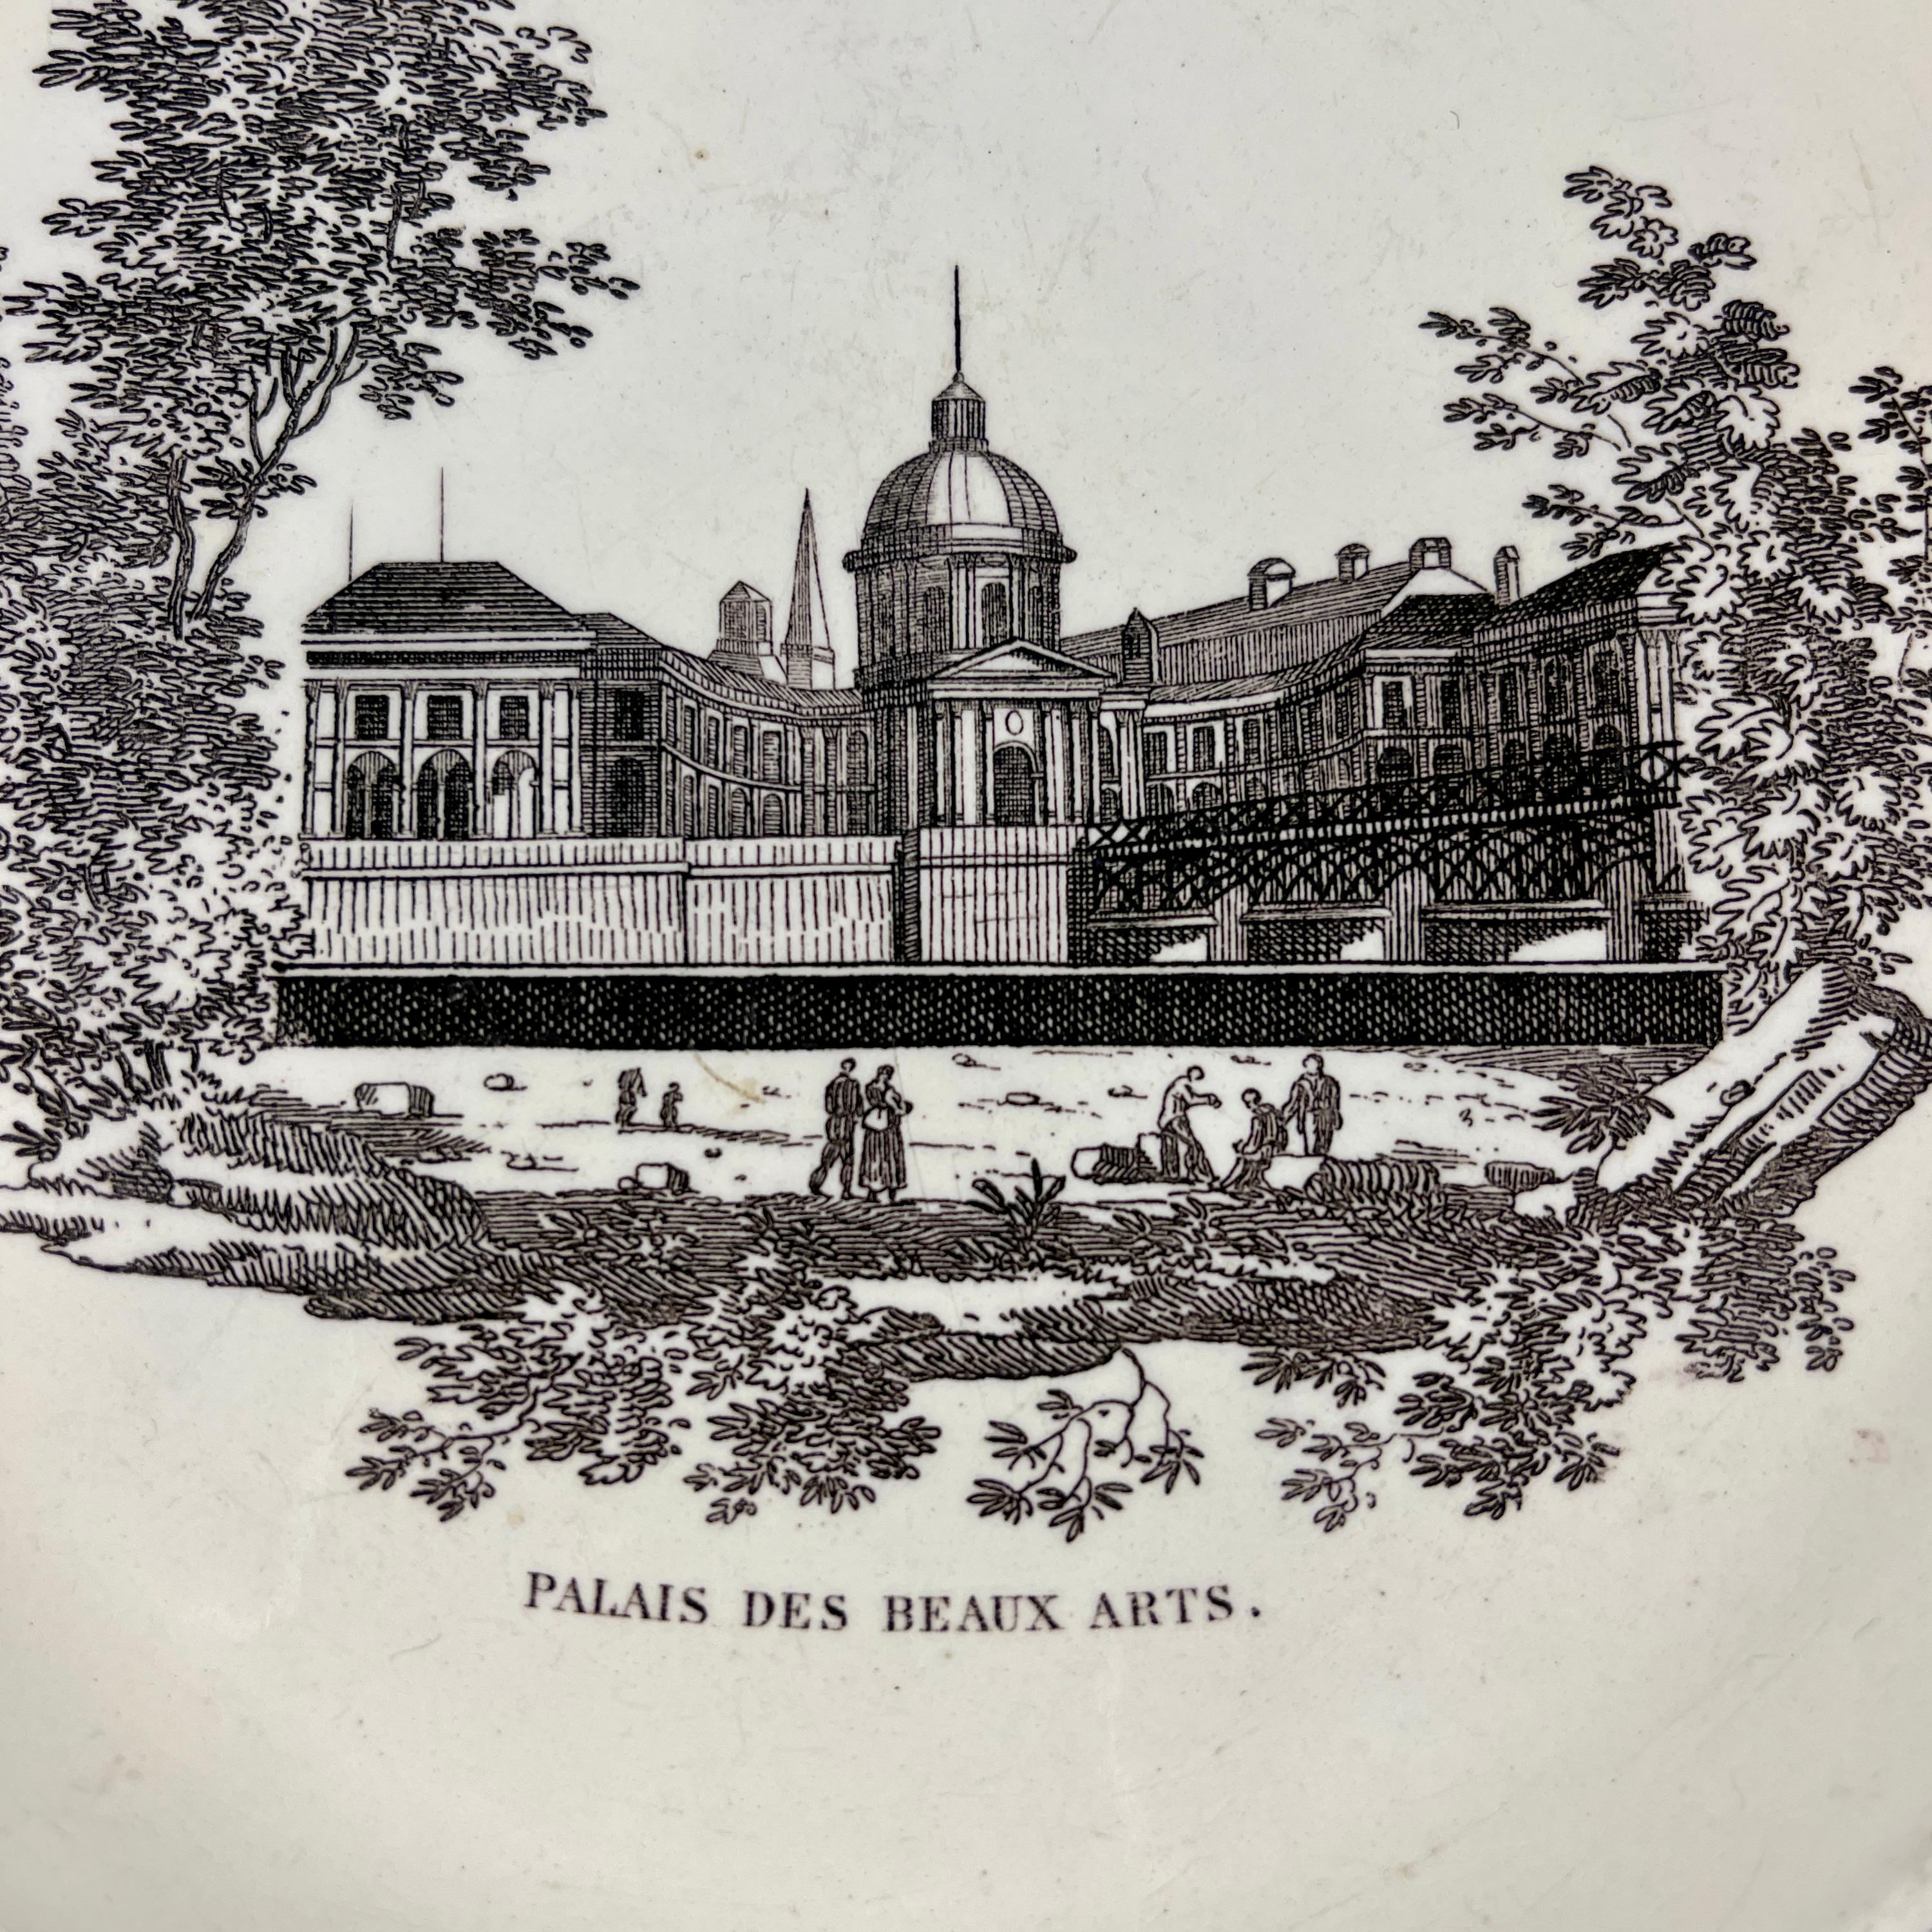 A French neoclassical faïence transfer printed creamware plate, Creil, circa 1824-1836.

A black transfer of an architectural image on a creamware body, depicting the Palais des Beaux Arts a Paris. The building is prominent, with the title printed